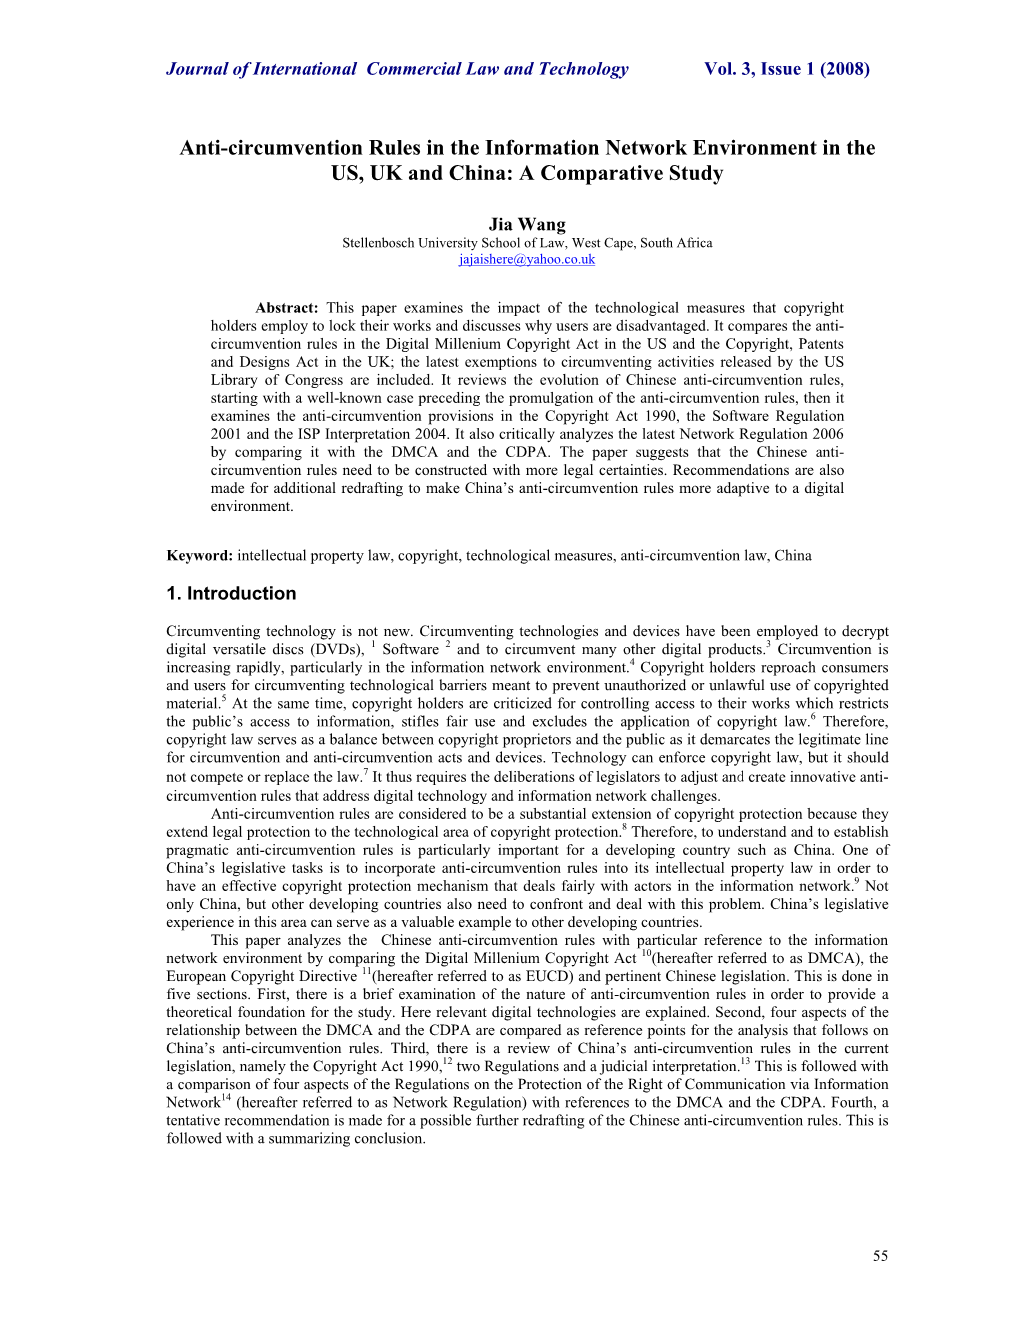 Anti-Circumvention Rules in the Information Network Environment in the US, UK and China: a Comparative Study